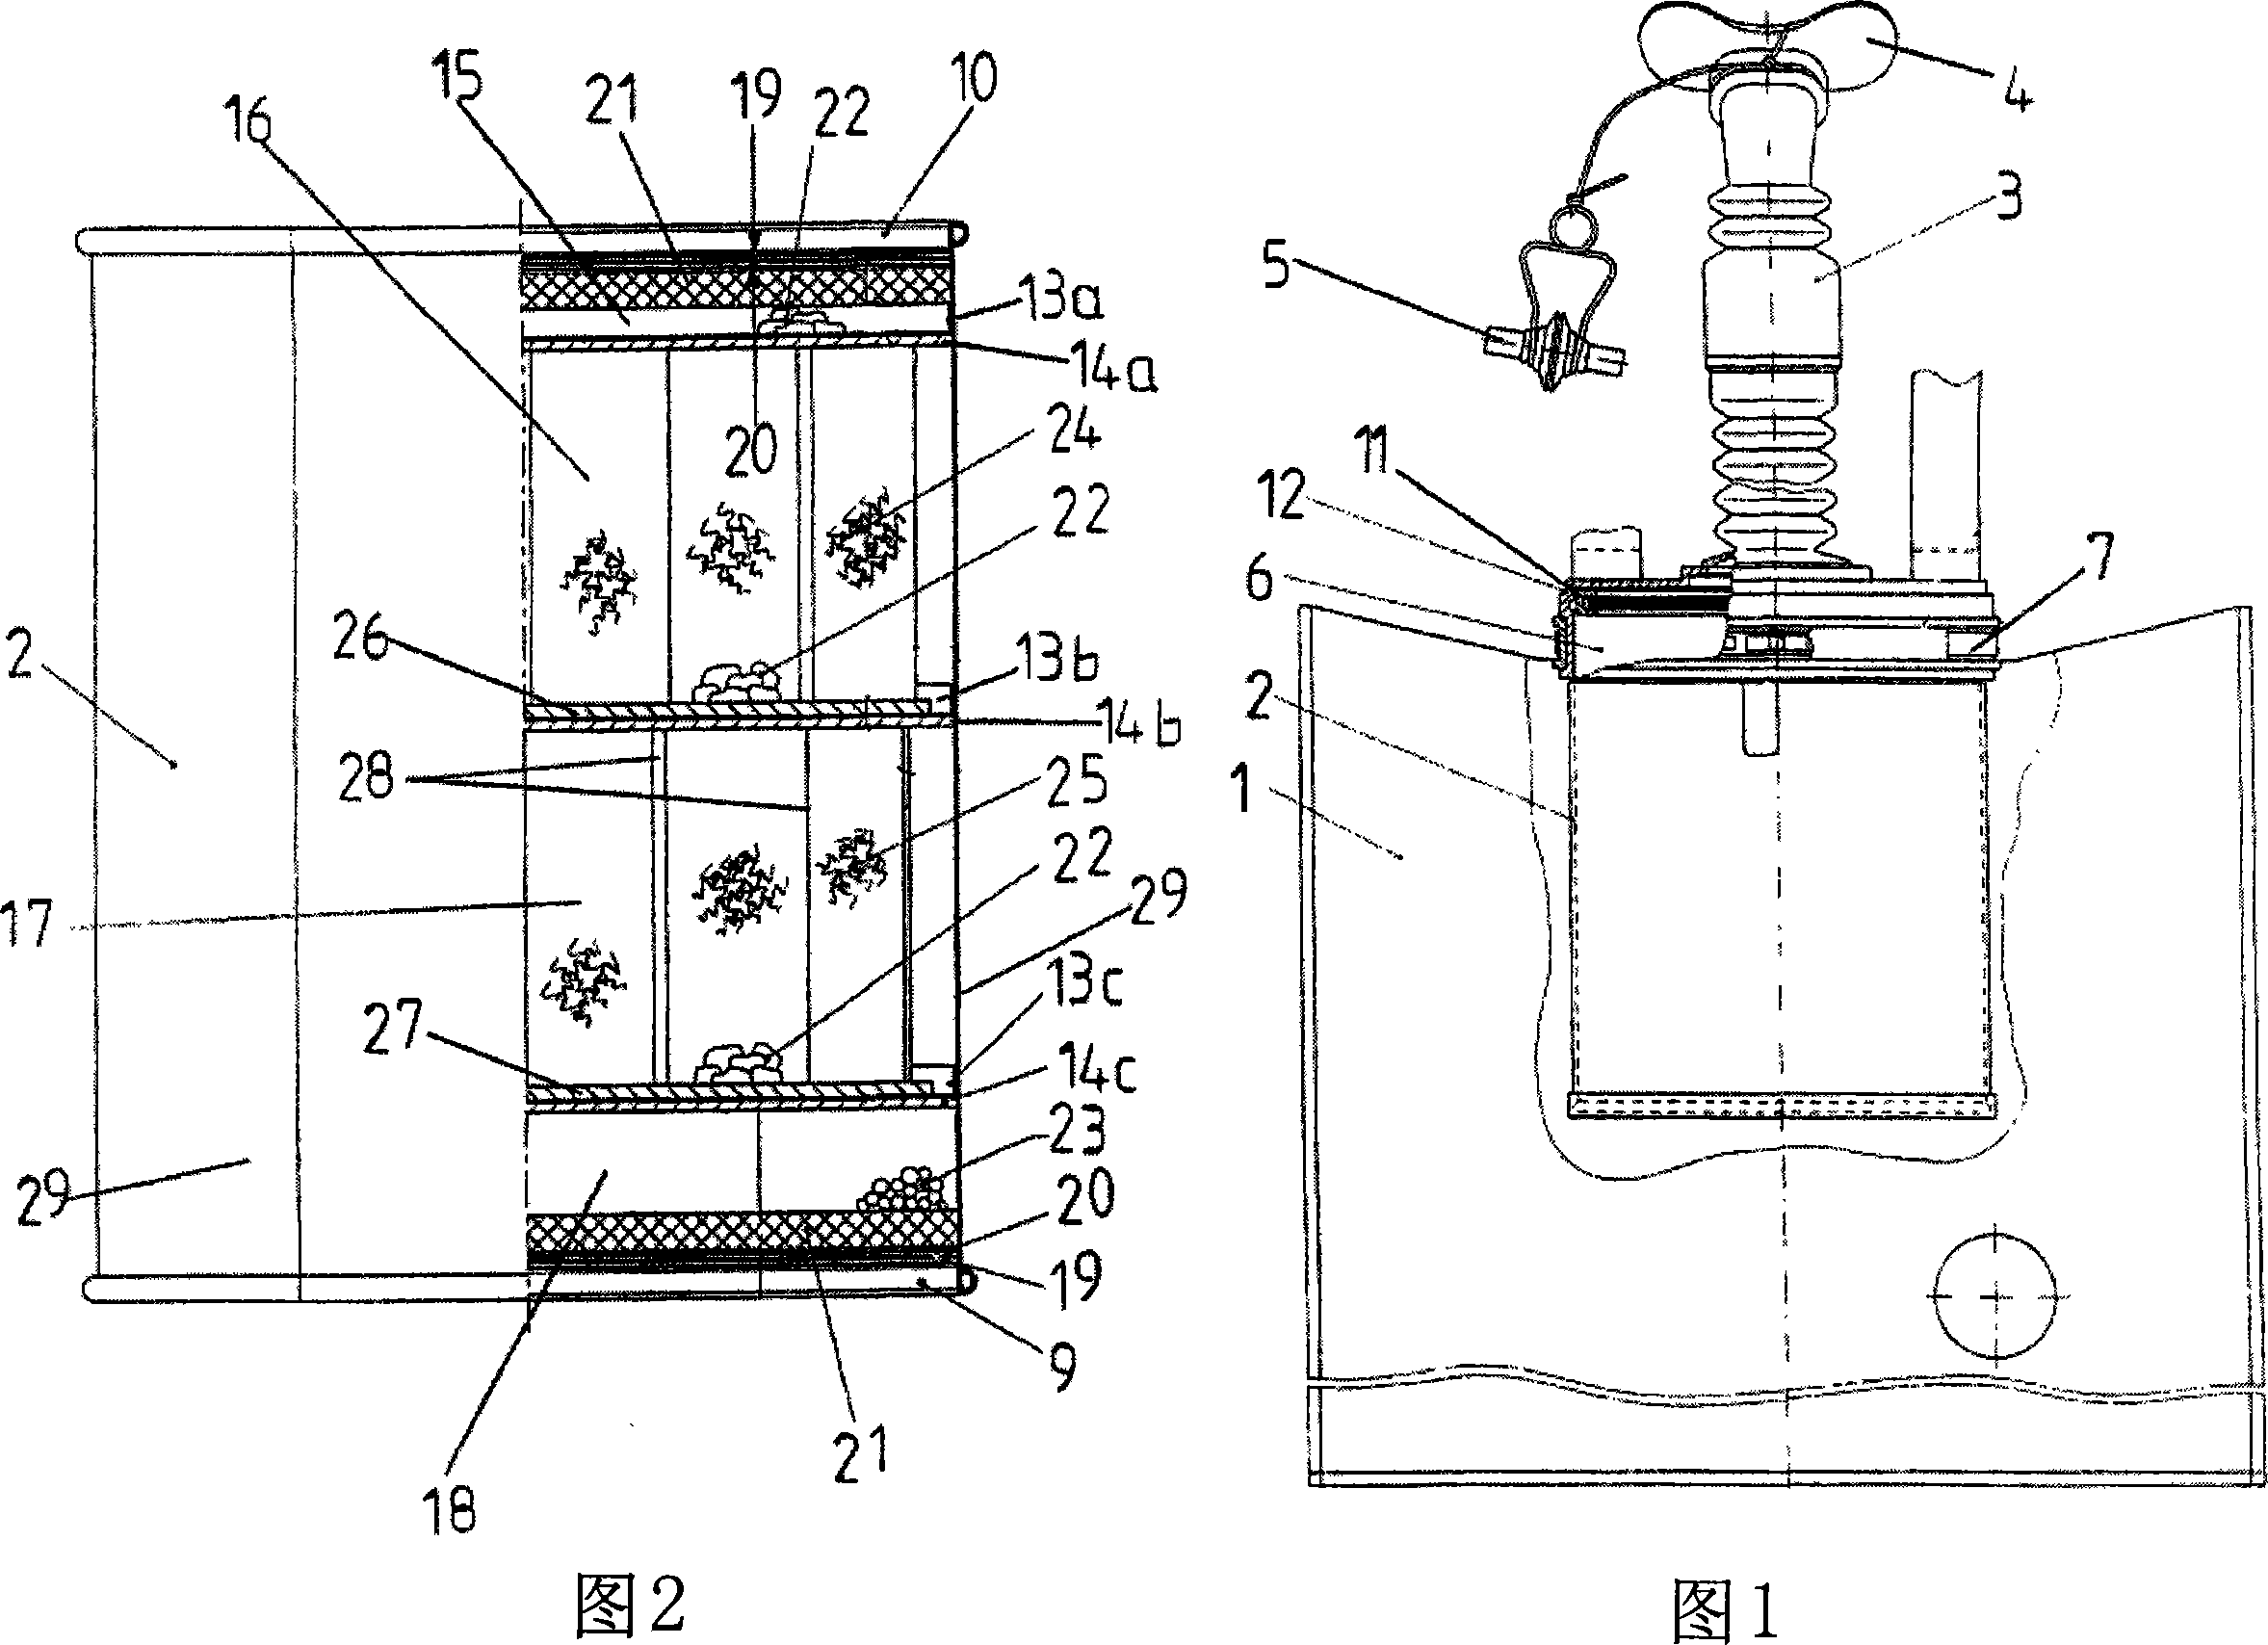 Oxygen-producing respiratory protection device